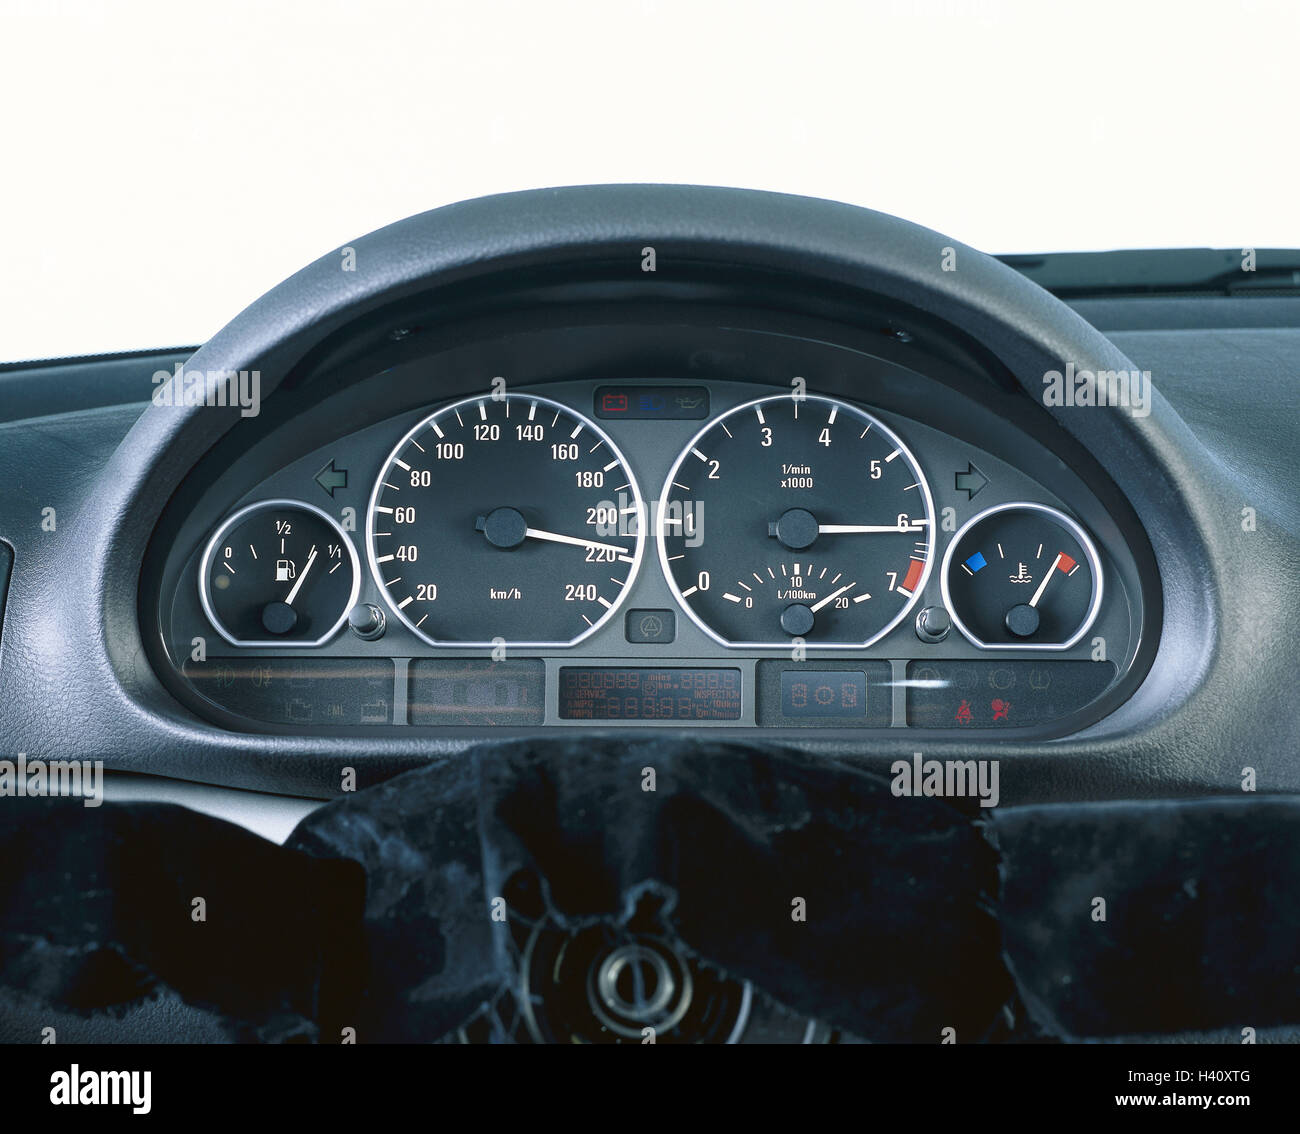 Car, detail, dash board, indicating, tachometre, speedometer, tachometre, temperature, temperature indicator, fuel gauge, tank display, instruments, instrument panel, pointer, display, speed, speed display, journey speed, cockpit, BMW, Still life, product photography Stock Photo